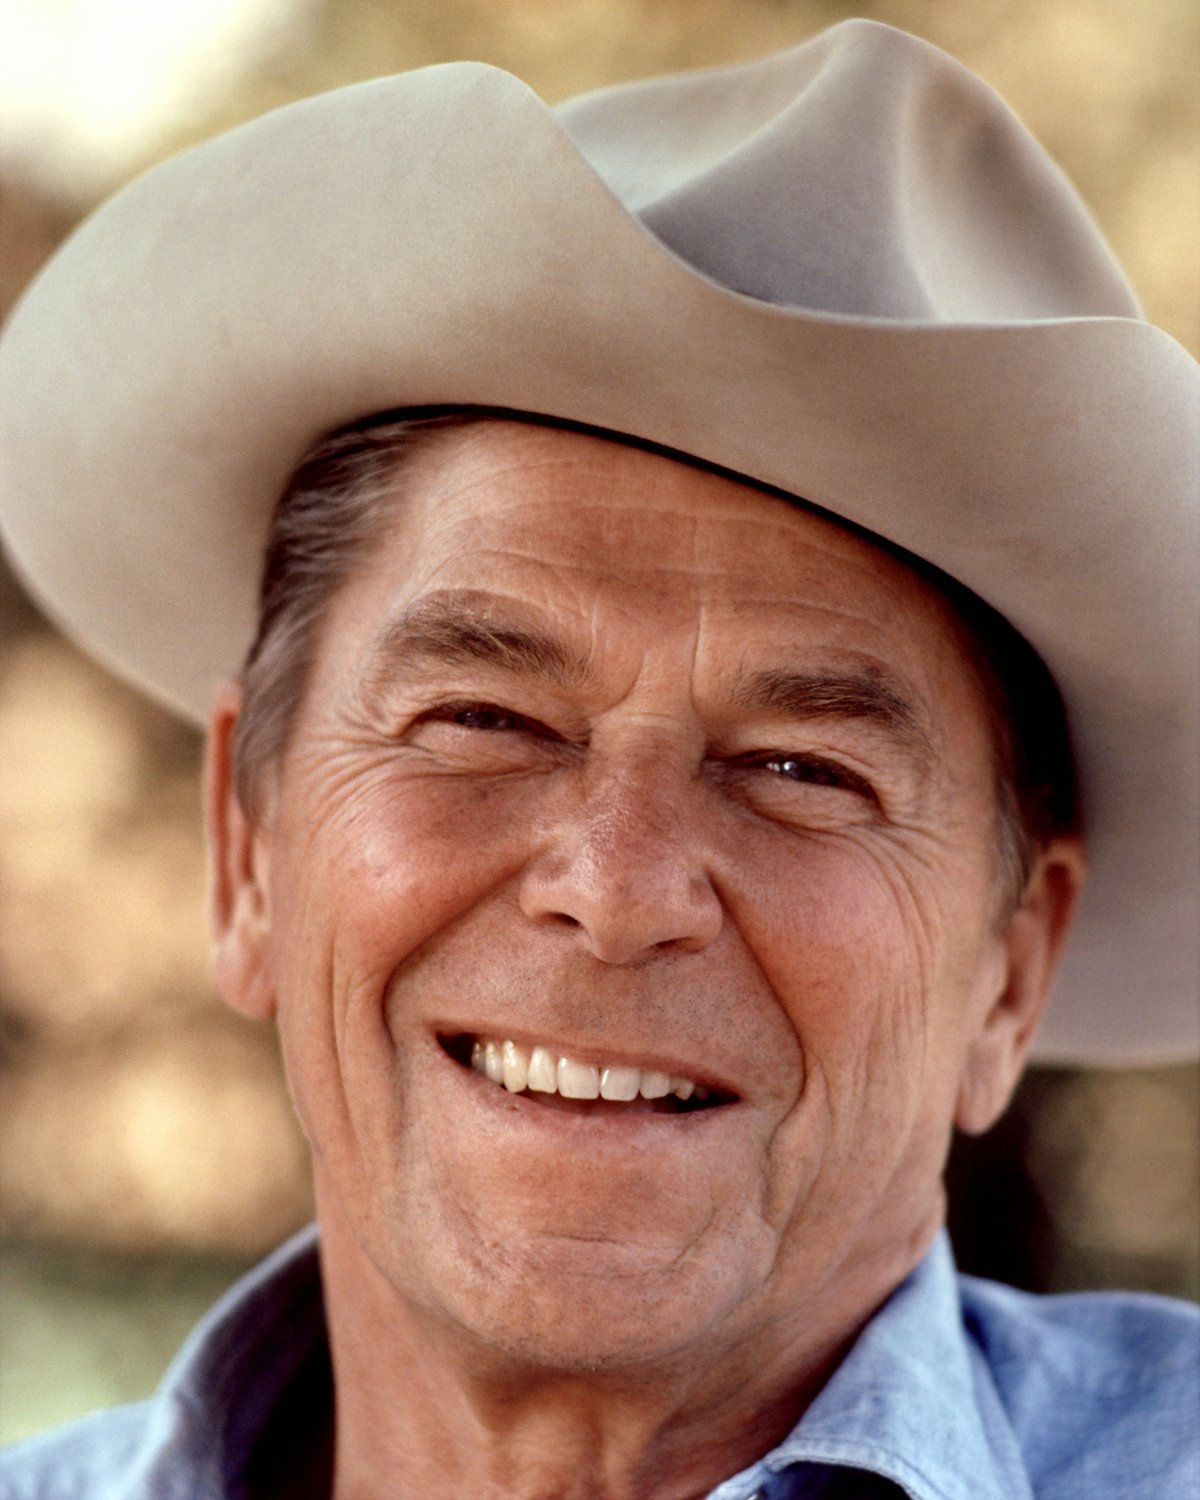 Ronald reagan wears a cowboy hat in 1976 - great picture! 